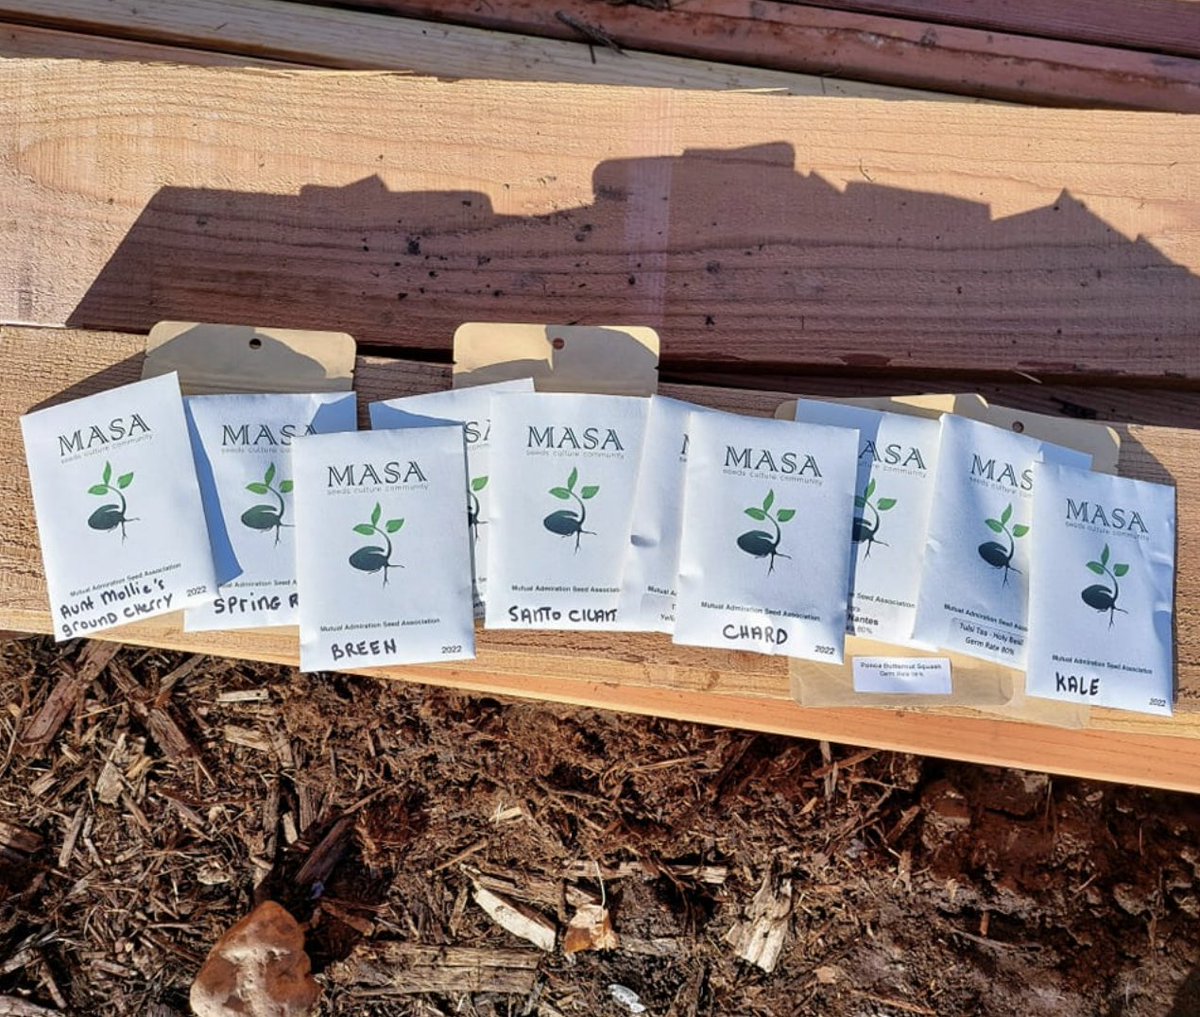 Excited about our new bulk order of seeds from the MASA Seed Foundation! When we build your Garden Beds, we provide you your choice of seeds so you can get right to growing! What are you excited to grow?!

#coloradogarden #coloradogardening #gardening #seeds #raisedgardenbeds